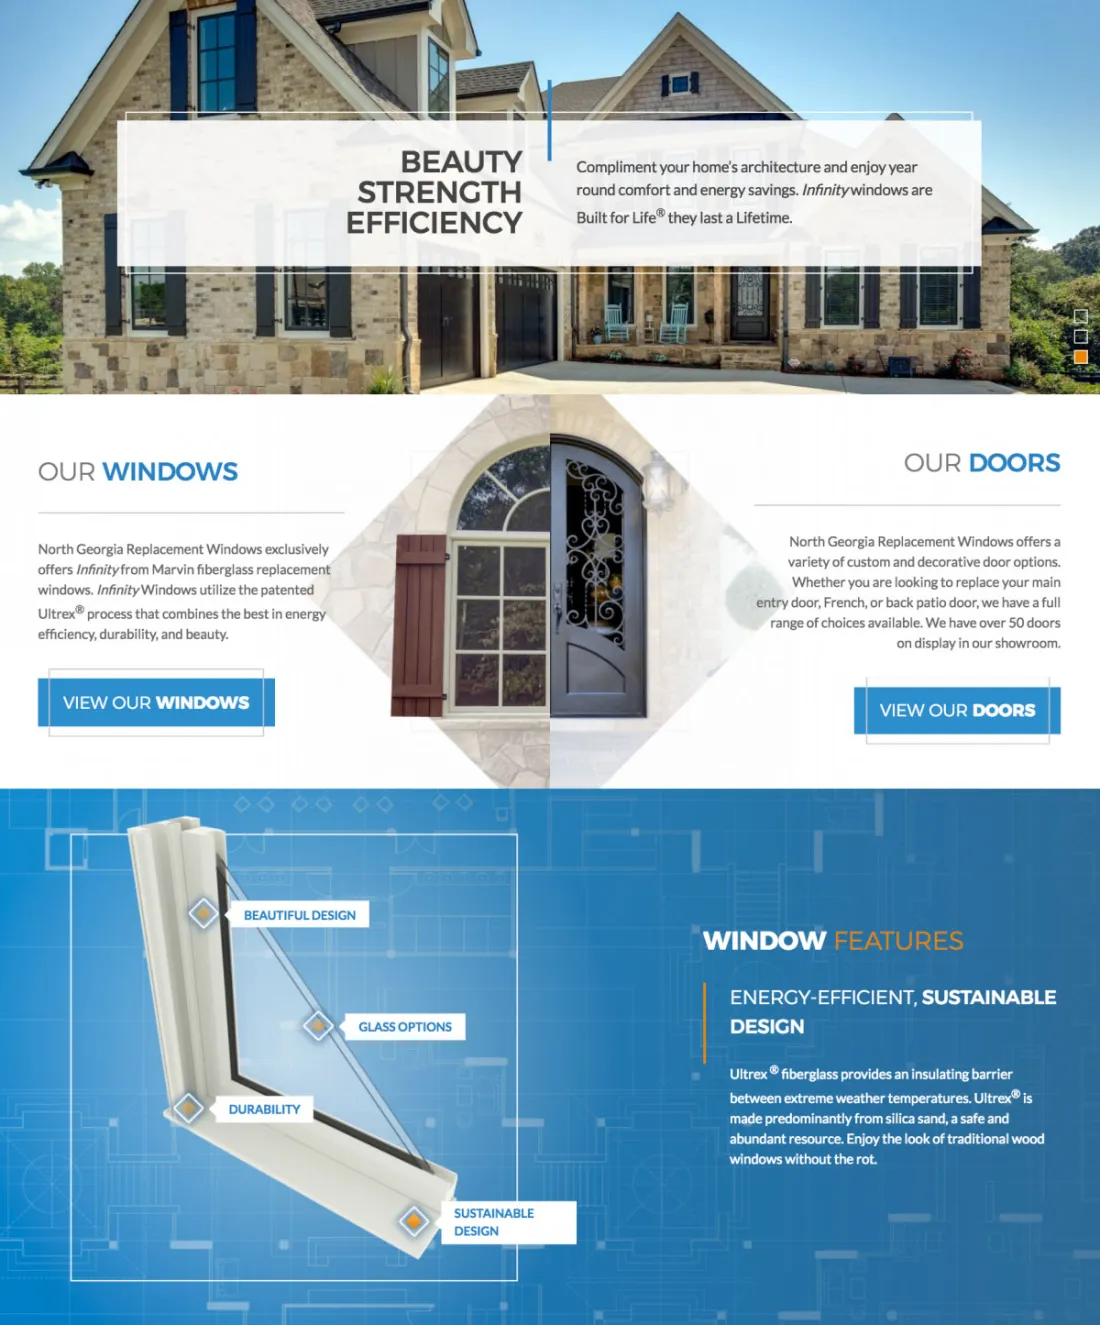 Image of website for North Georgia Replacement Windows